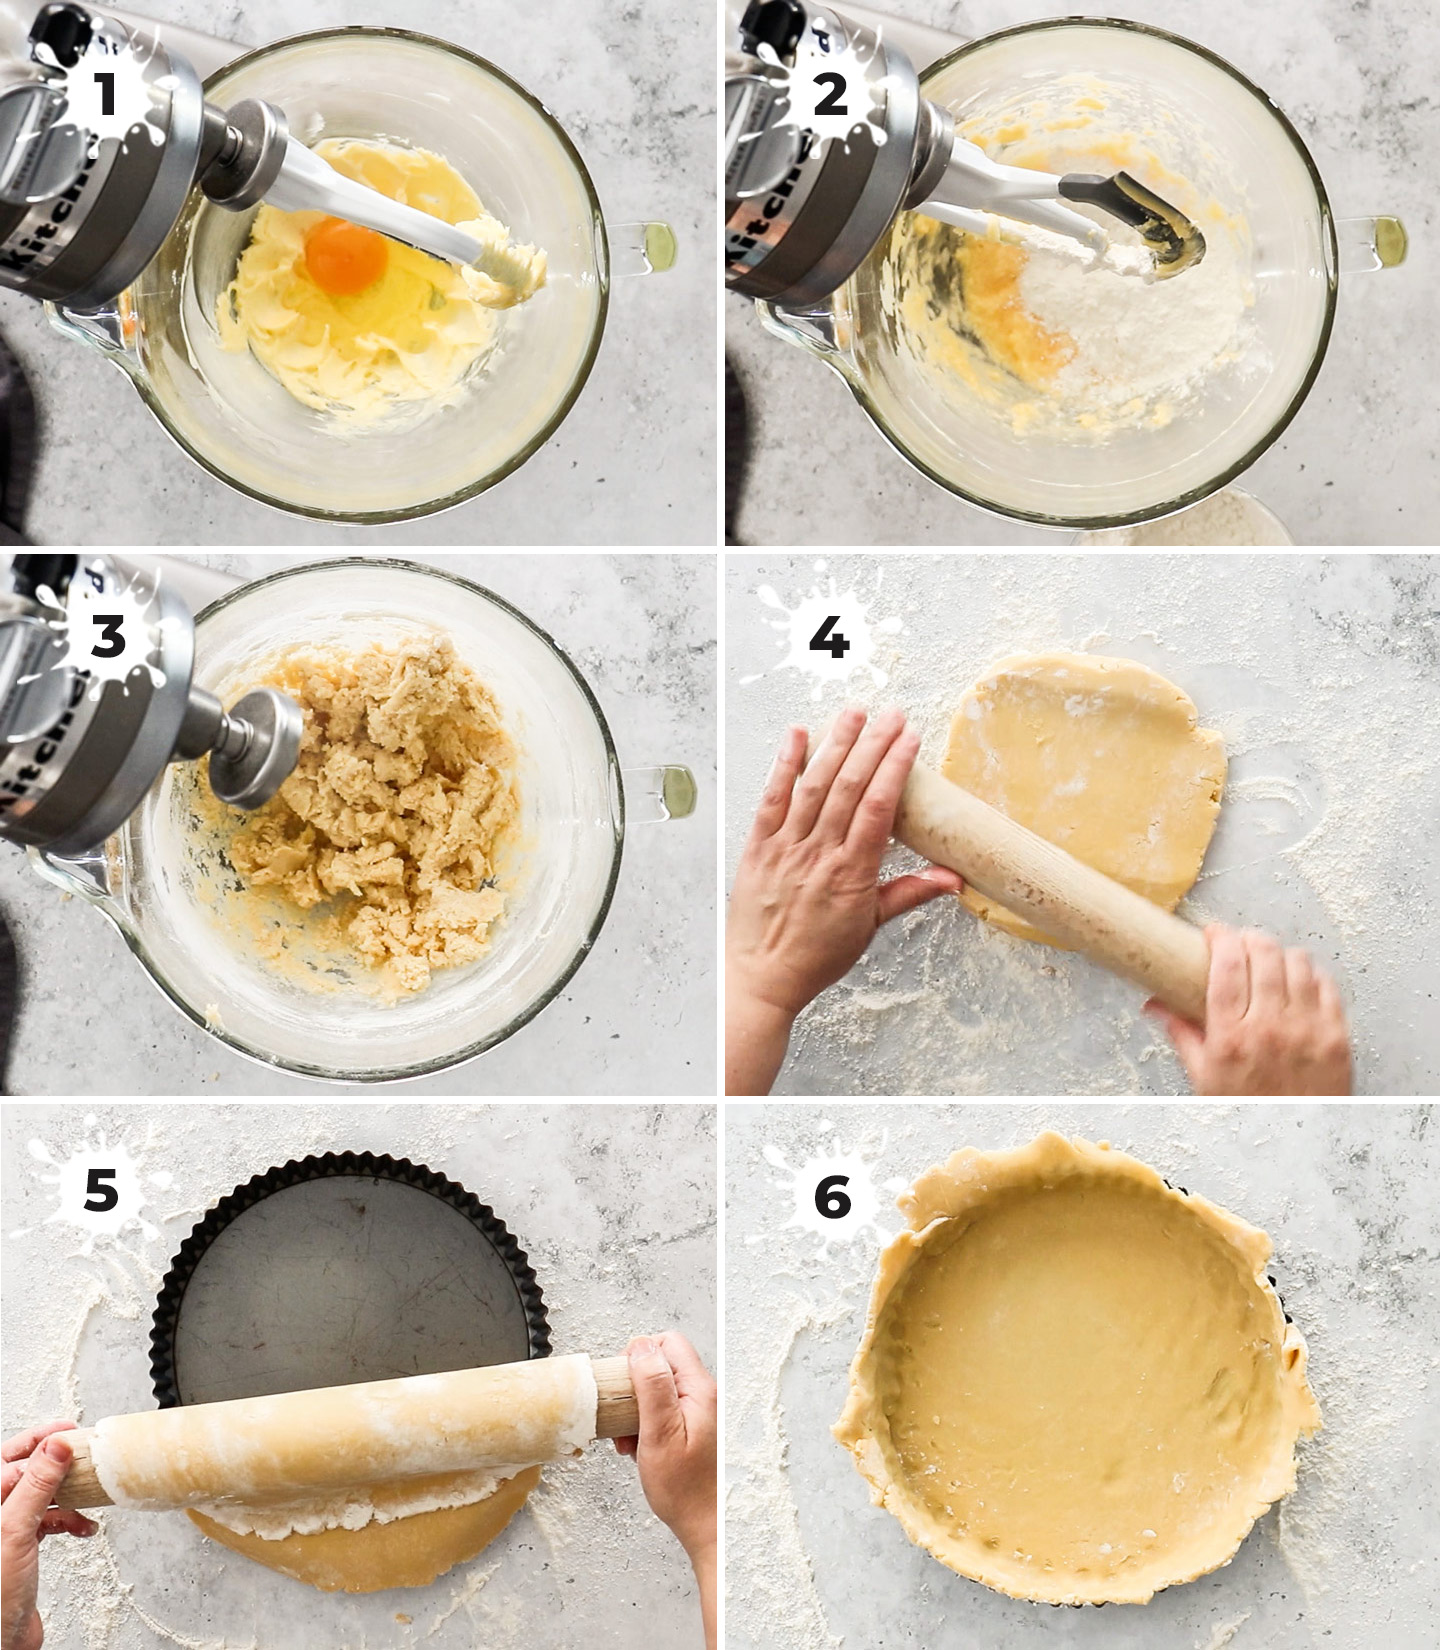 A collage showing how to make the pastry.